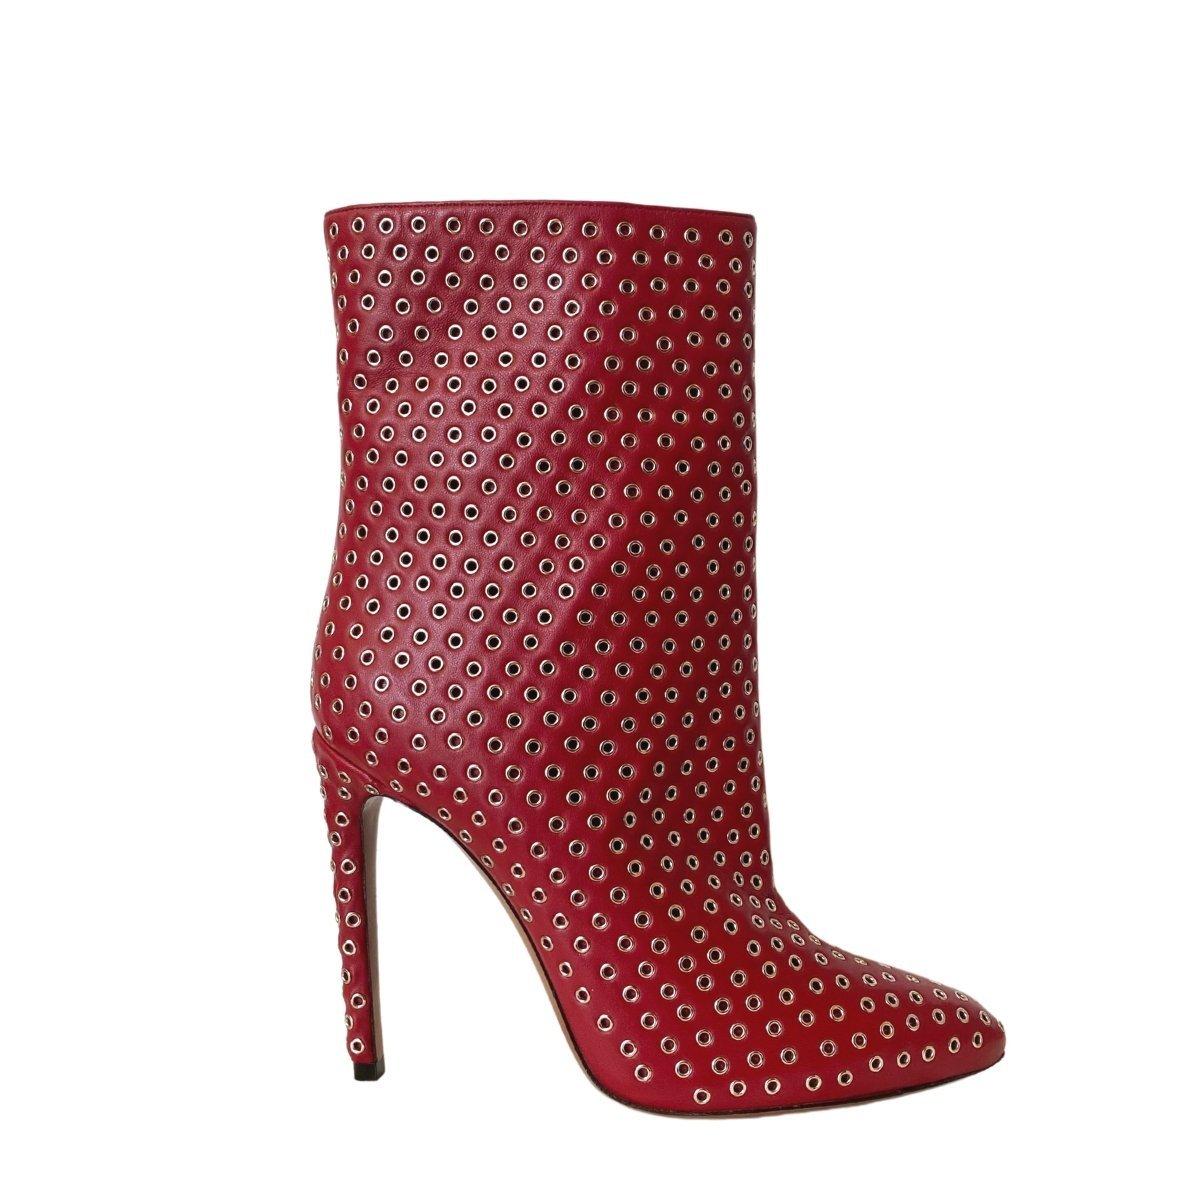 Alaia Studded Leather Ankle Boots size 36 For Sale 1